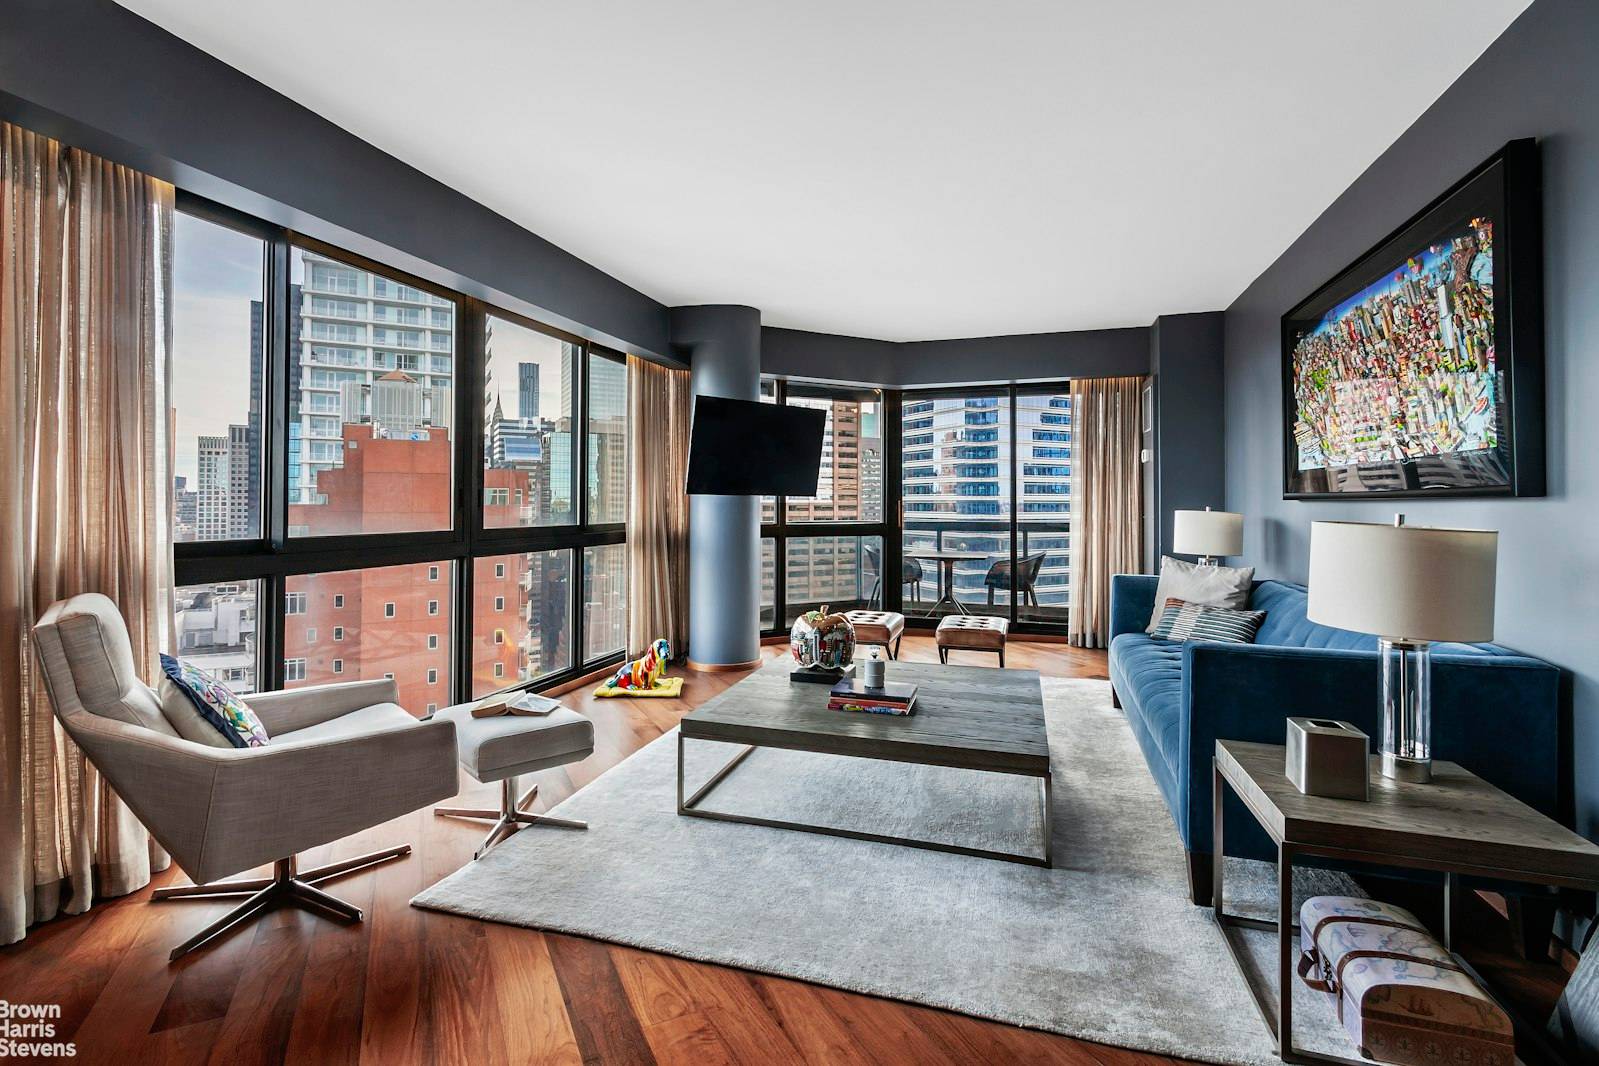 One Of A Kind renovation with sensational viewsIntroducing Savoy Apartment 31A.